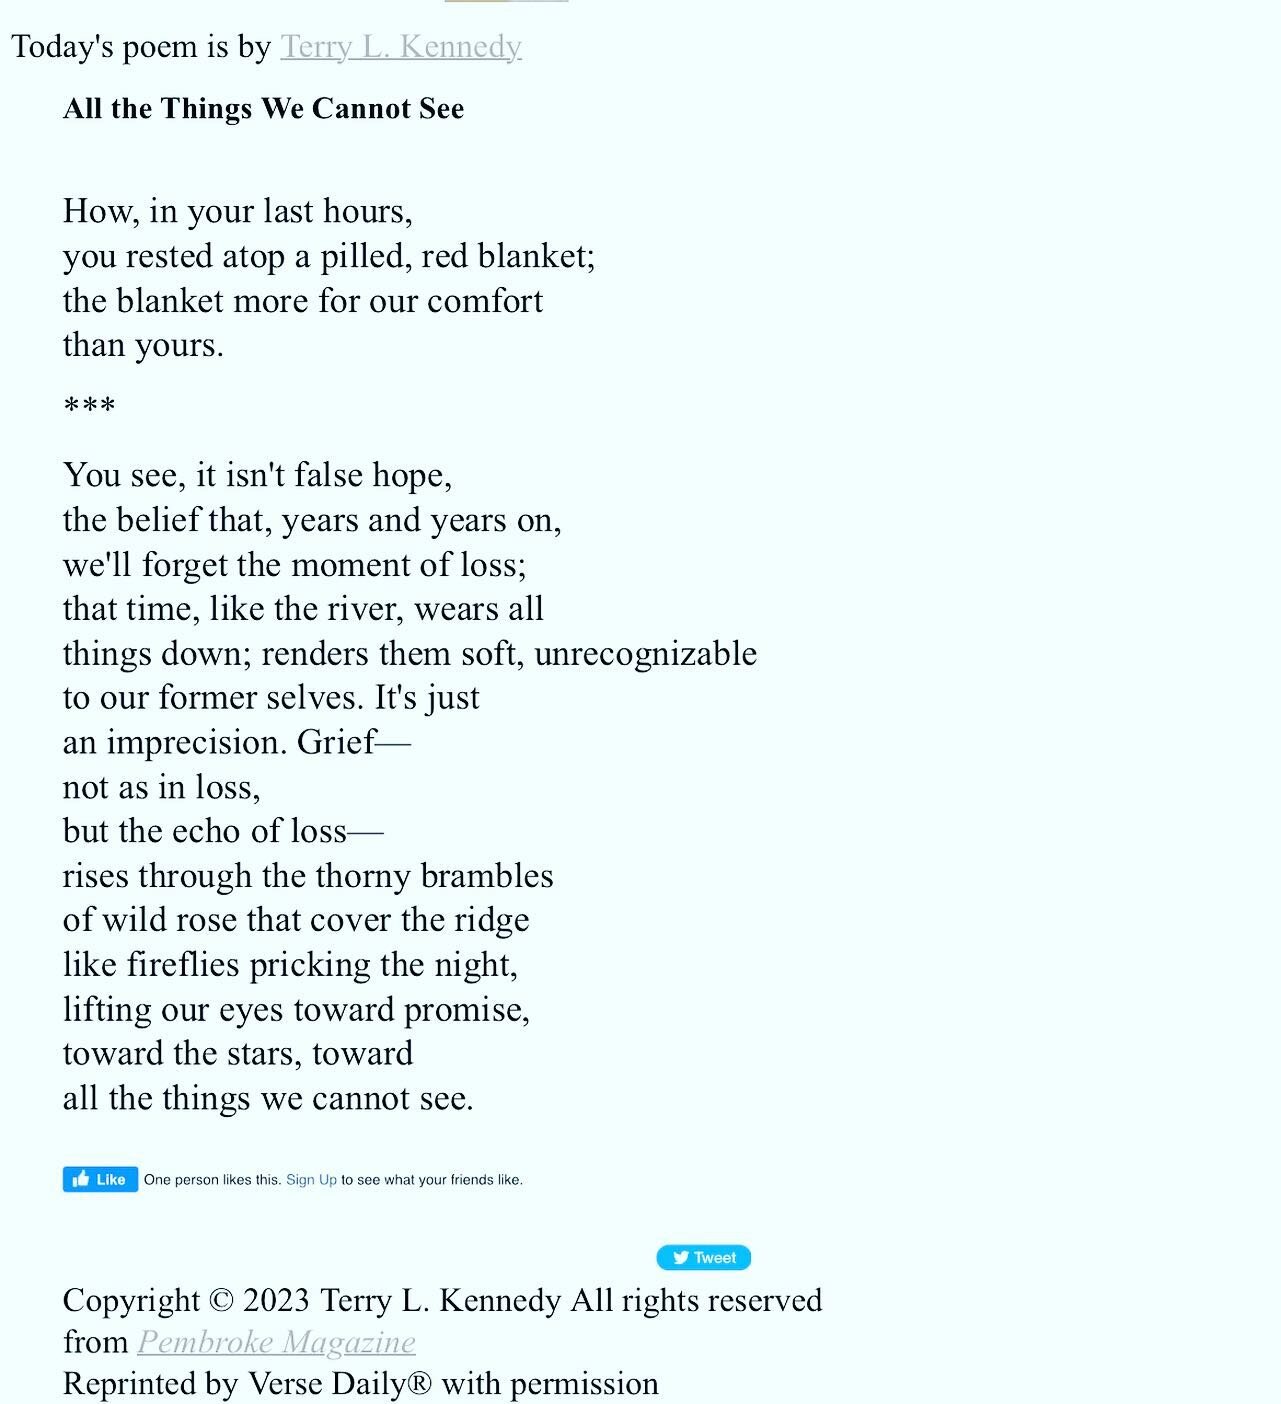 Thanks to Verse Daily (versedaily.org) for republishing Terry L. Kennedy&rsquo;s poem &ldquo;All the Things We Cannot See&rdquo; from our most recent issue! @terrylkennedy